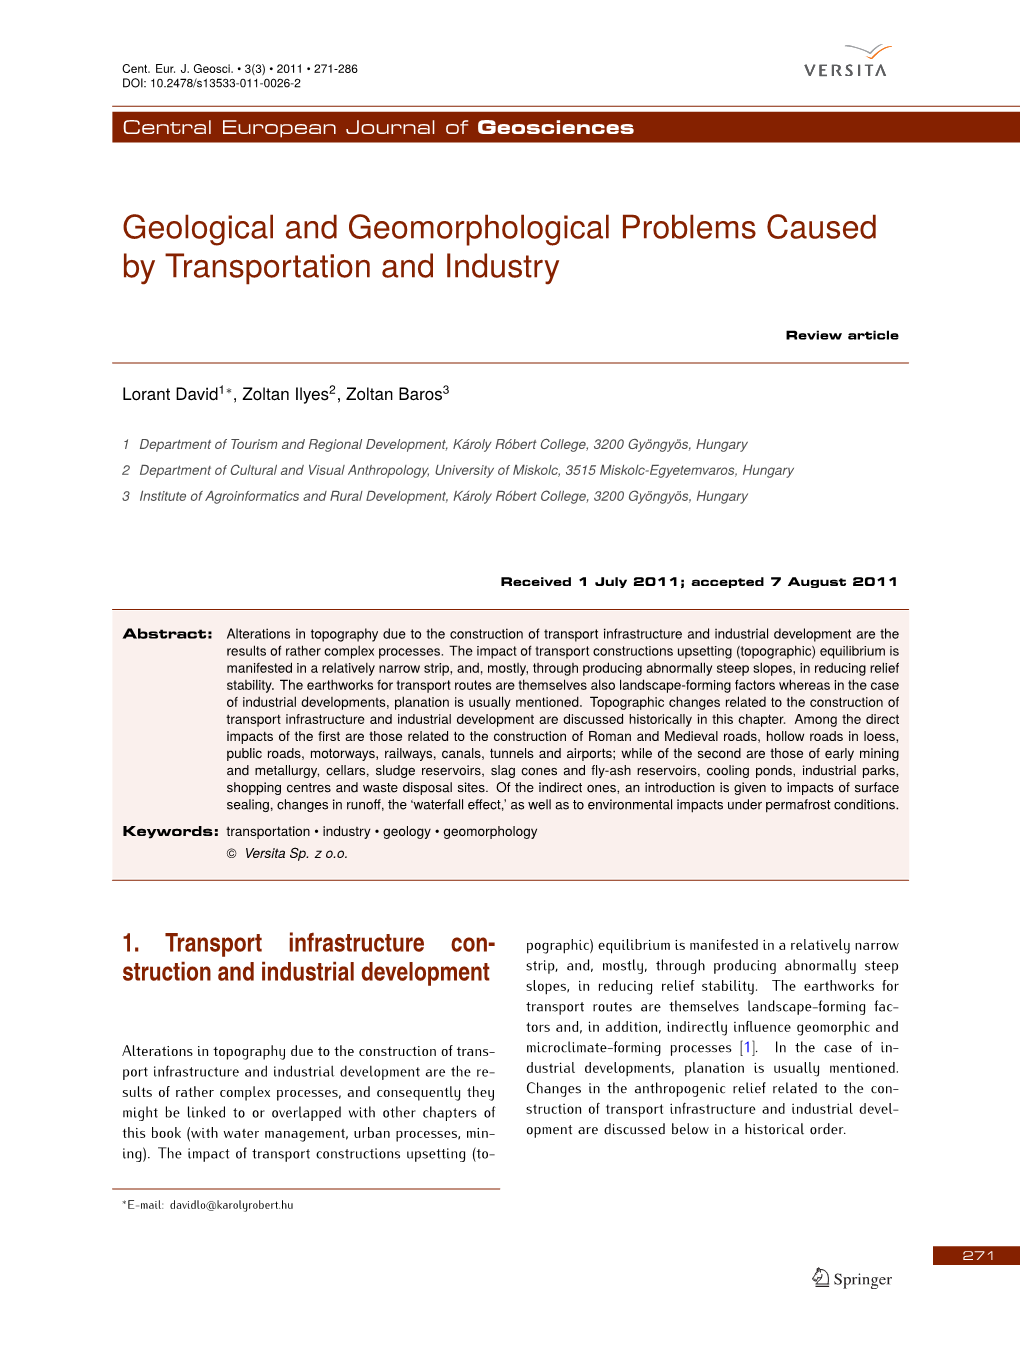 Geological and Geomorphological Problems Caused by Transportation and Industry